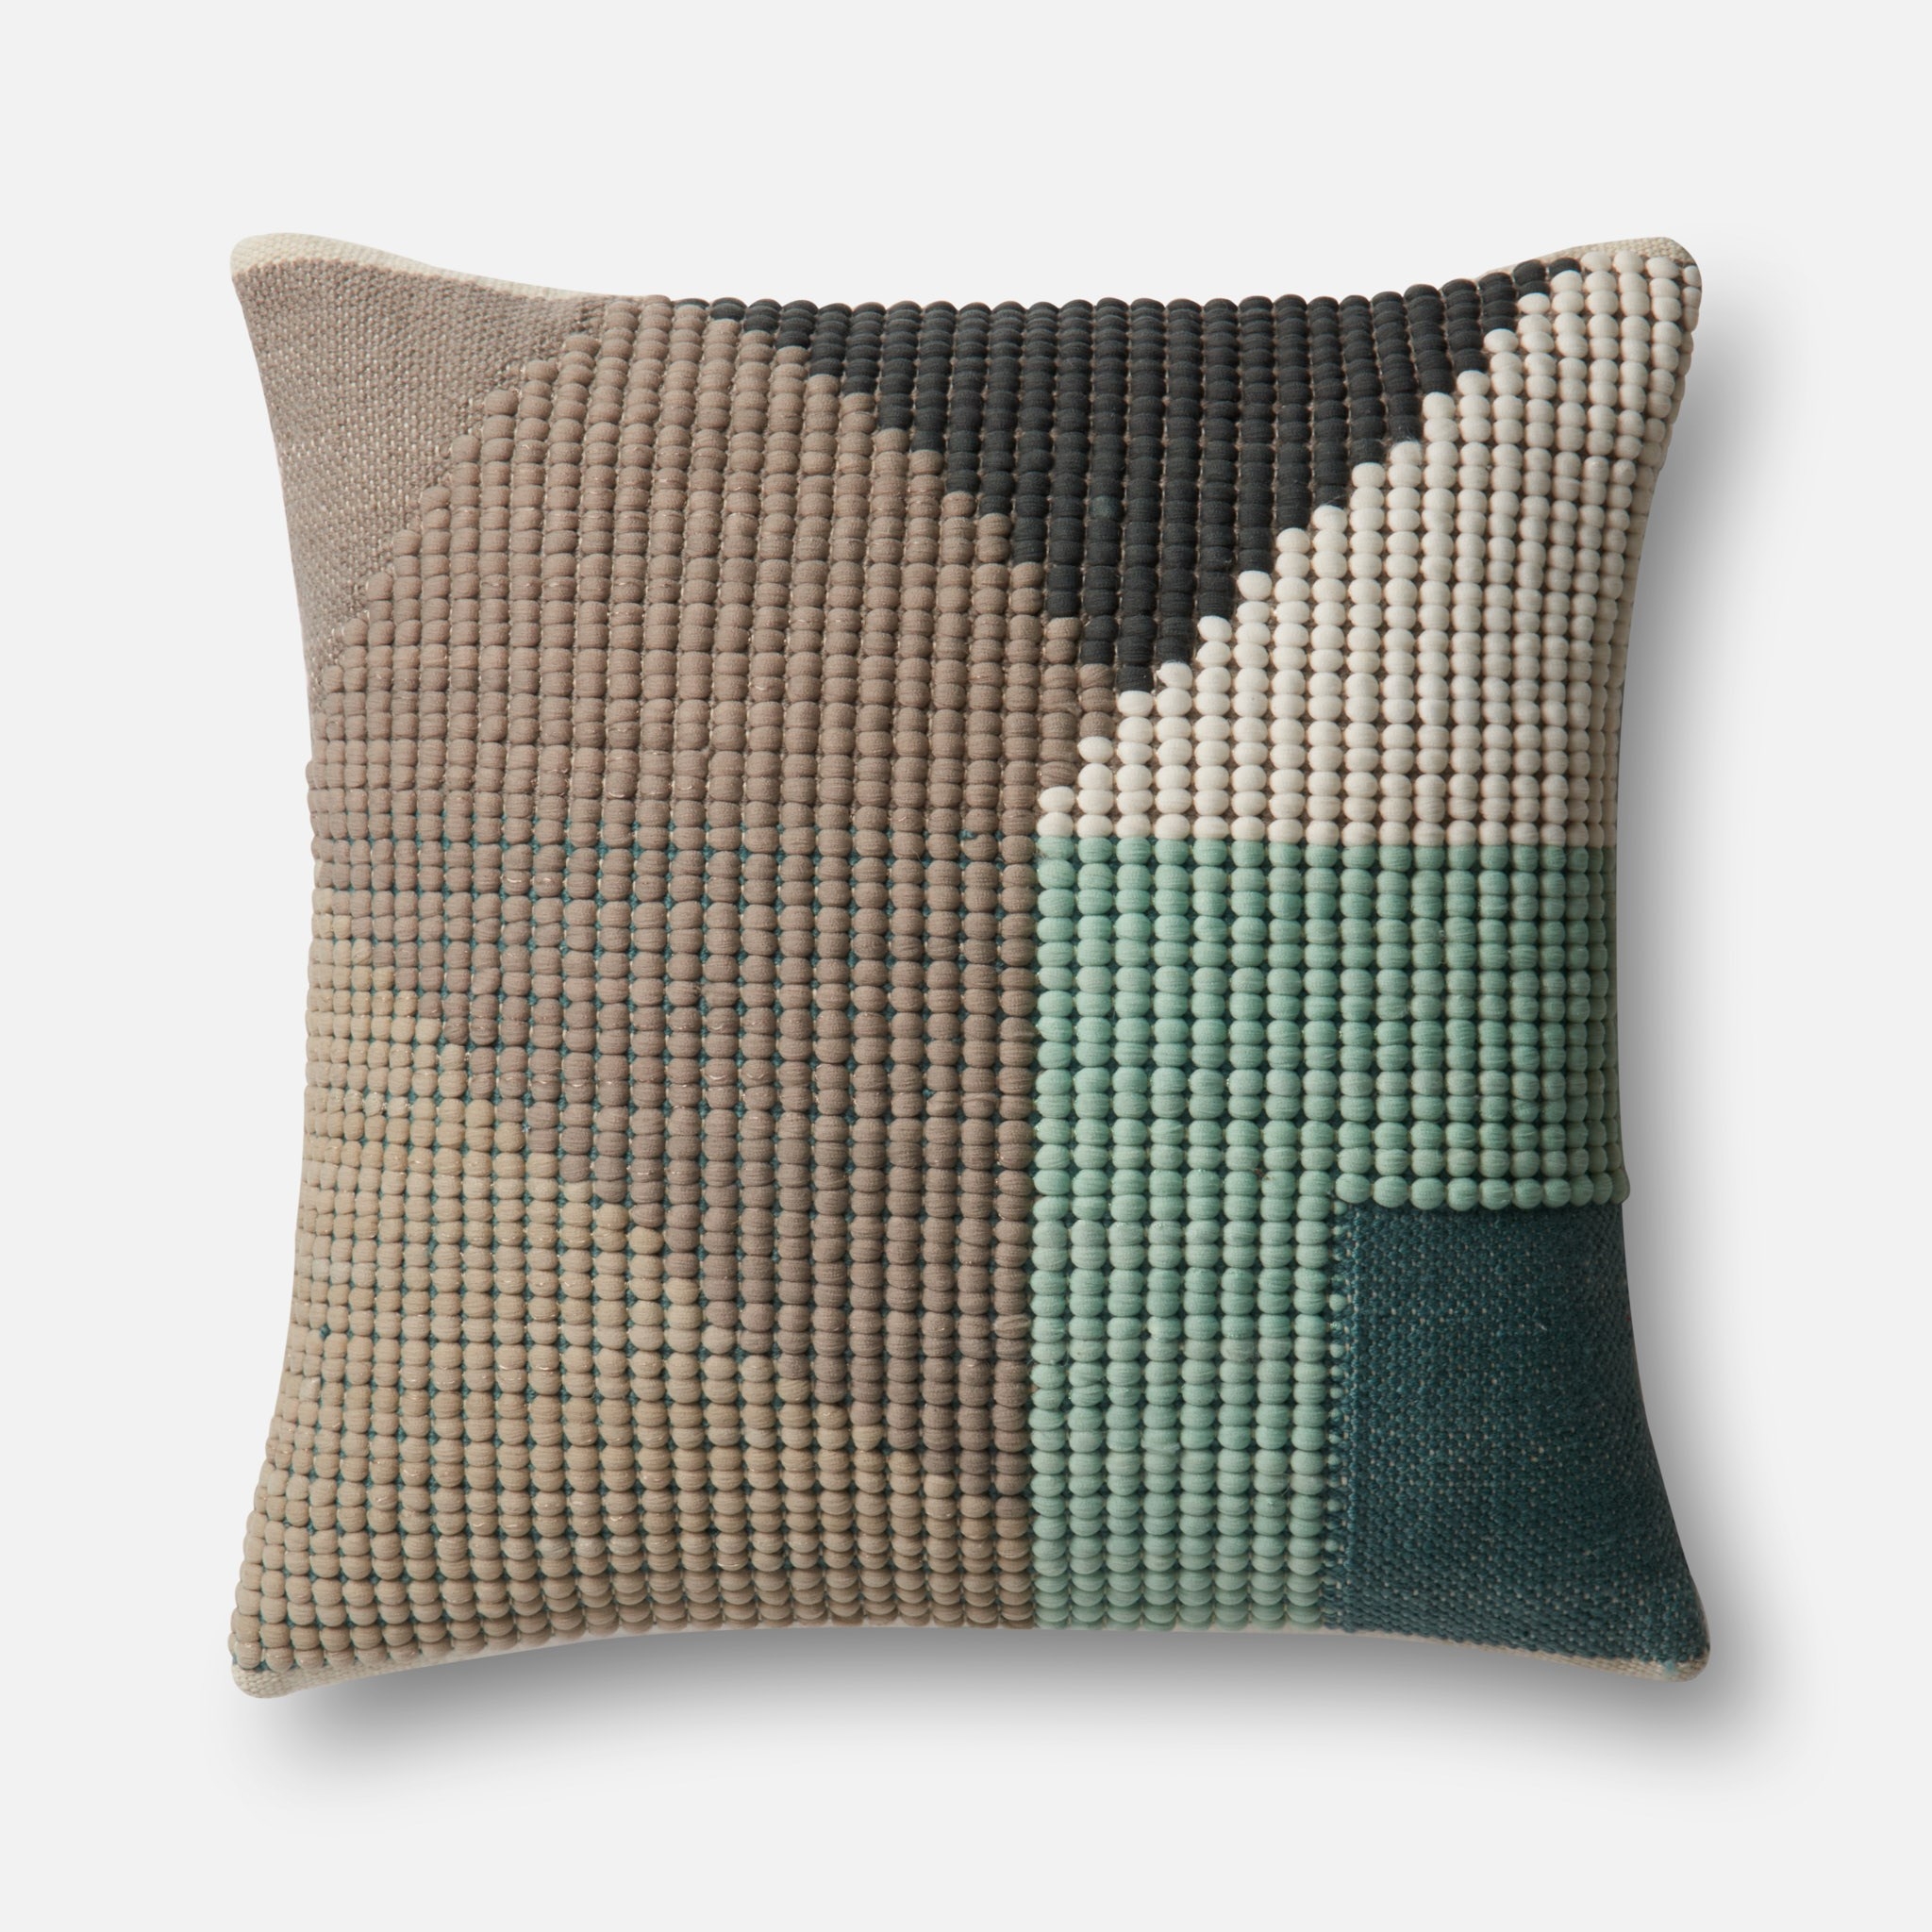 PILLOWS - TEAL / MULTI - 22" X 22" Cover Only - Image 0